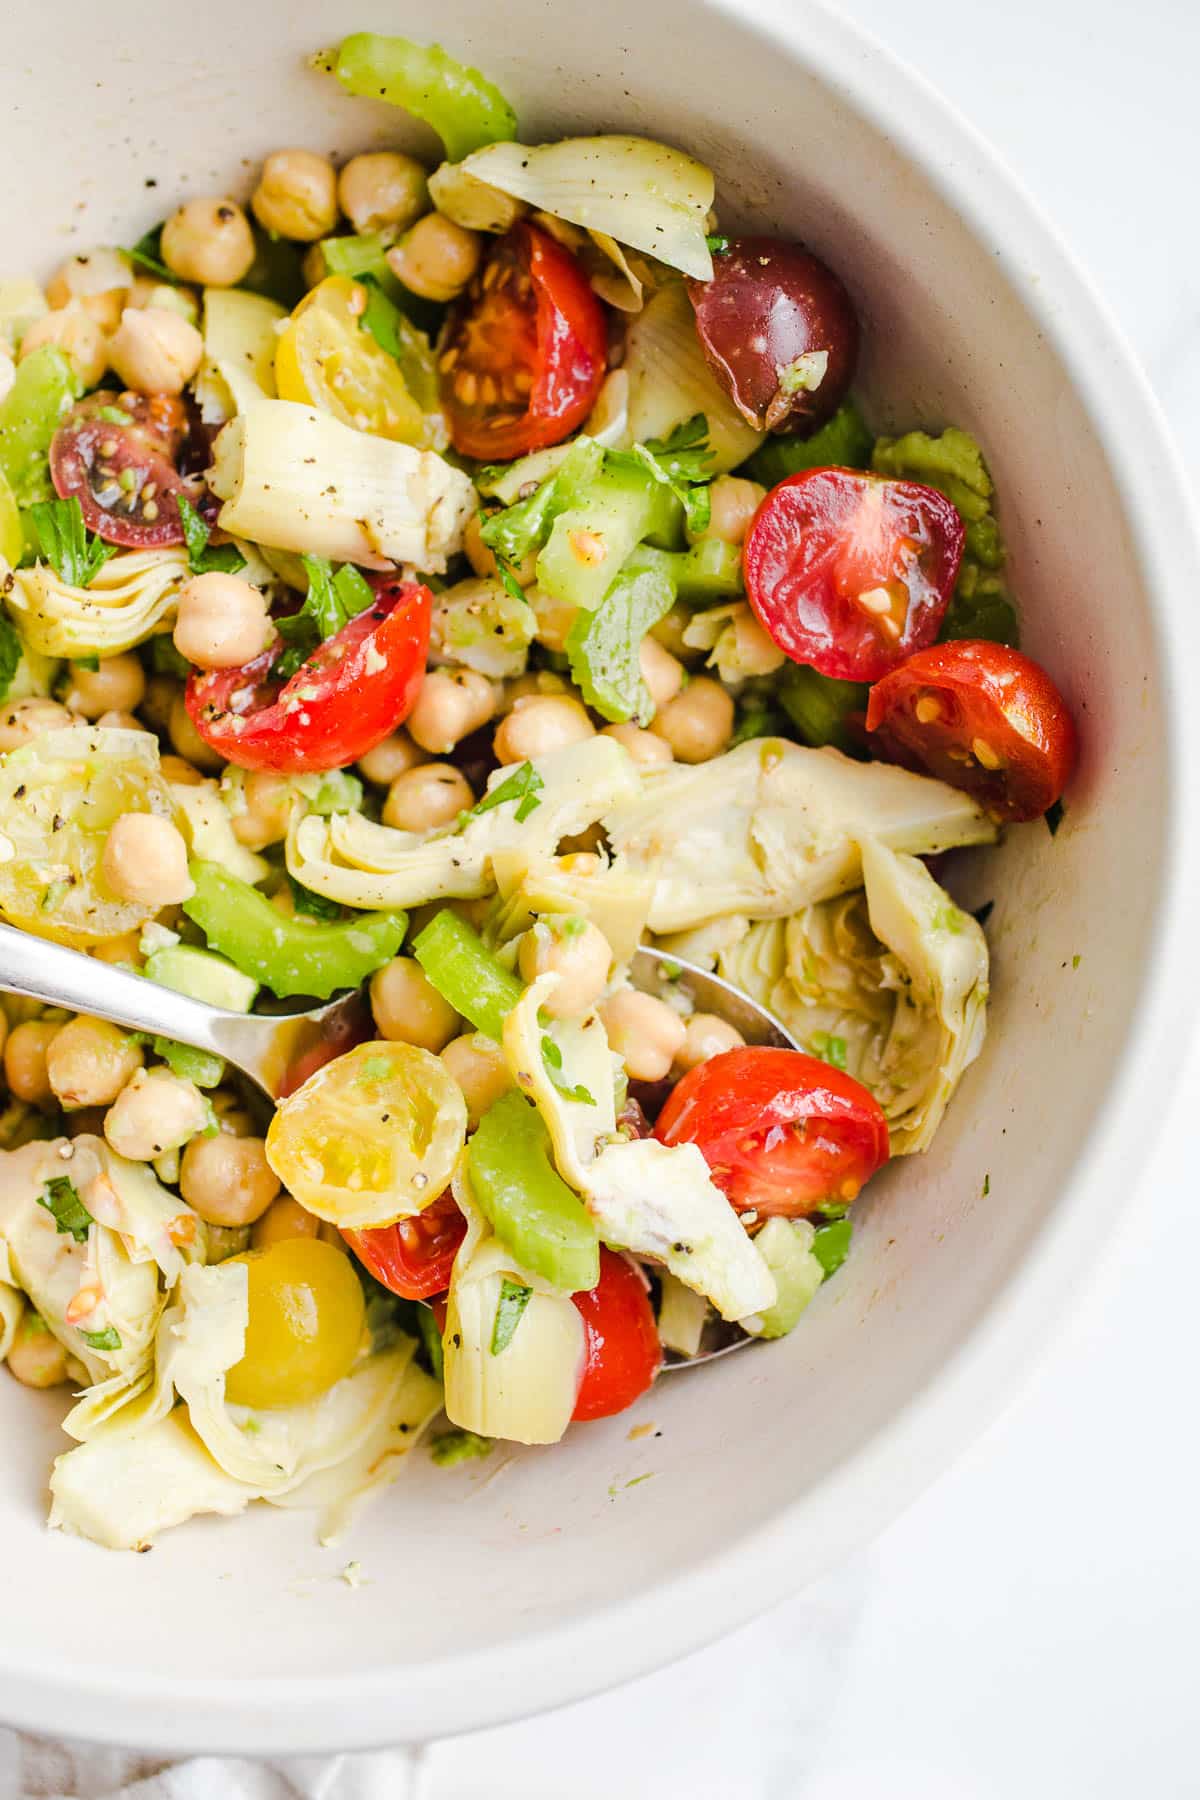 A salad with chickpeas, tomatoes, and artichokes in a bowl.